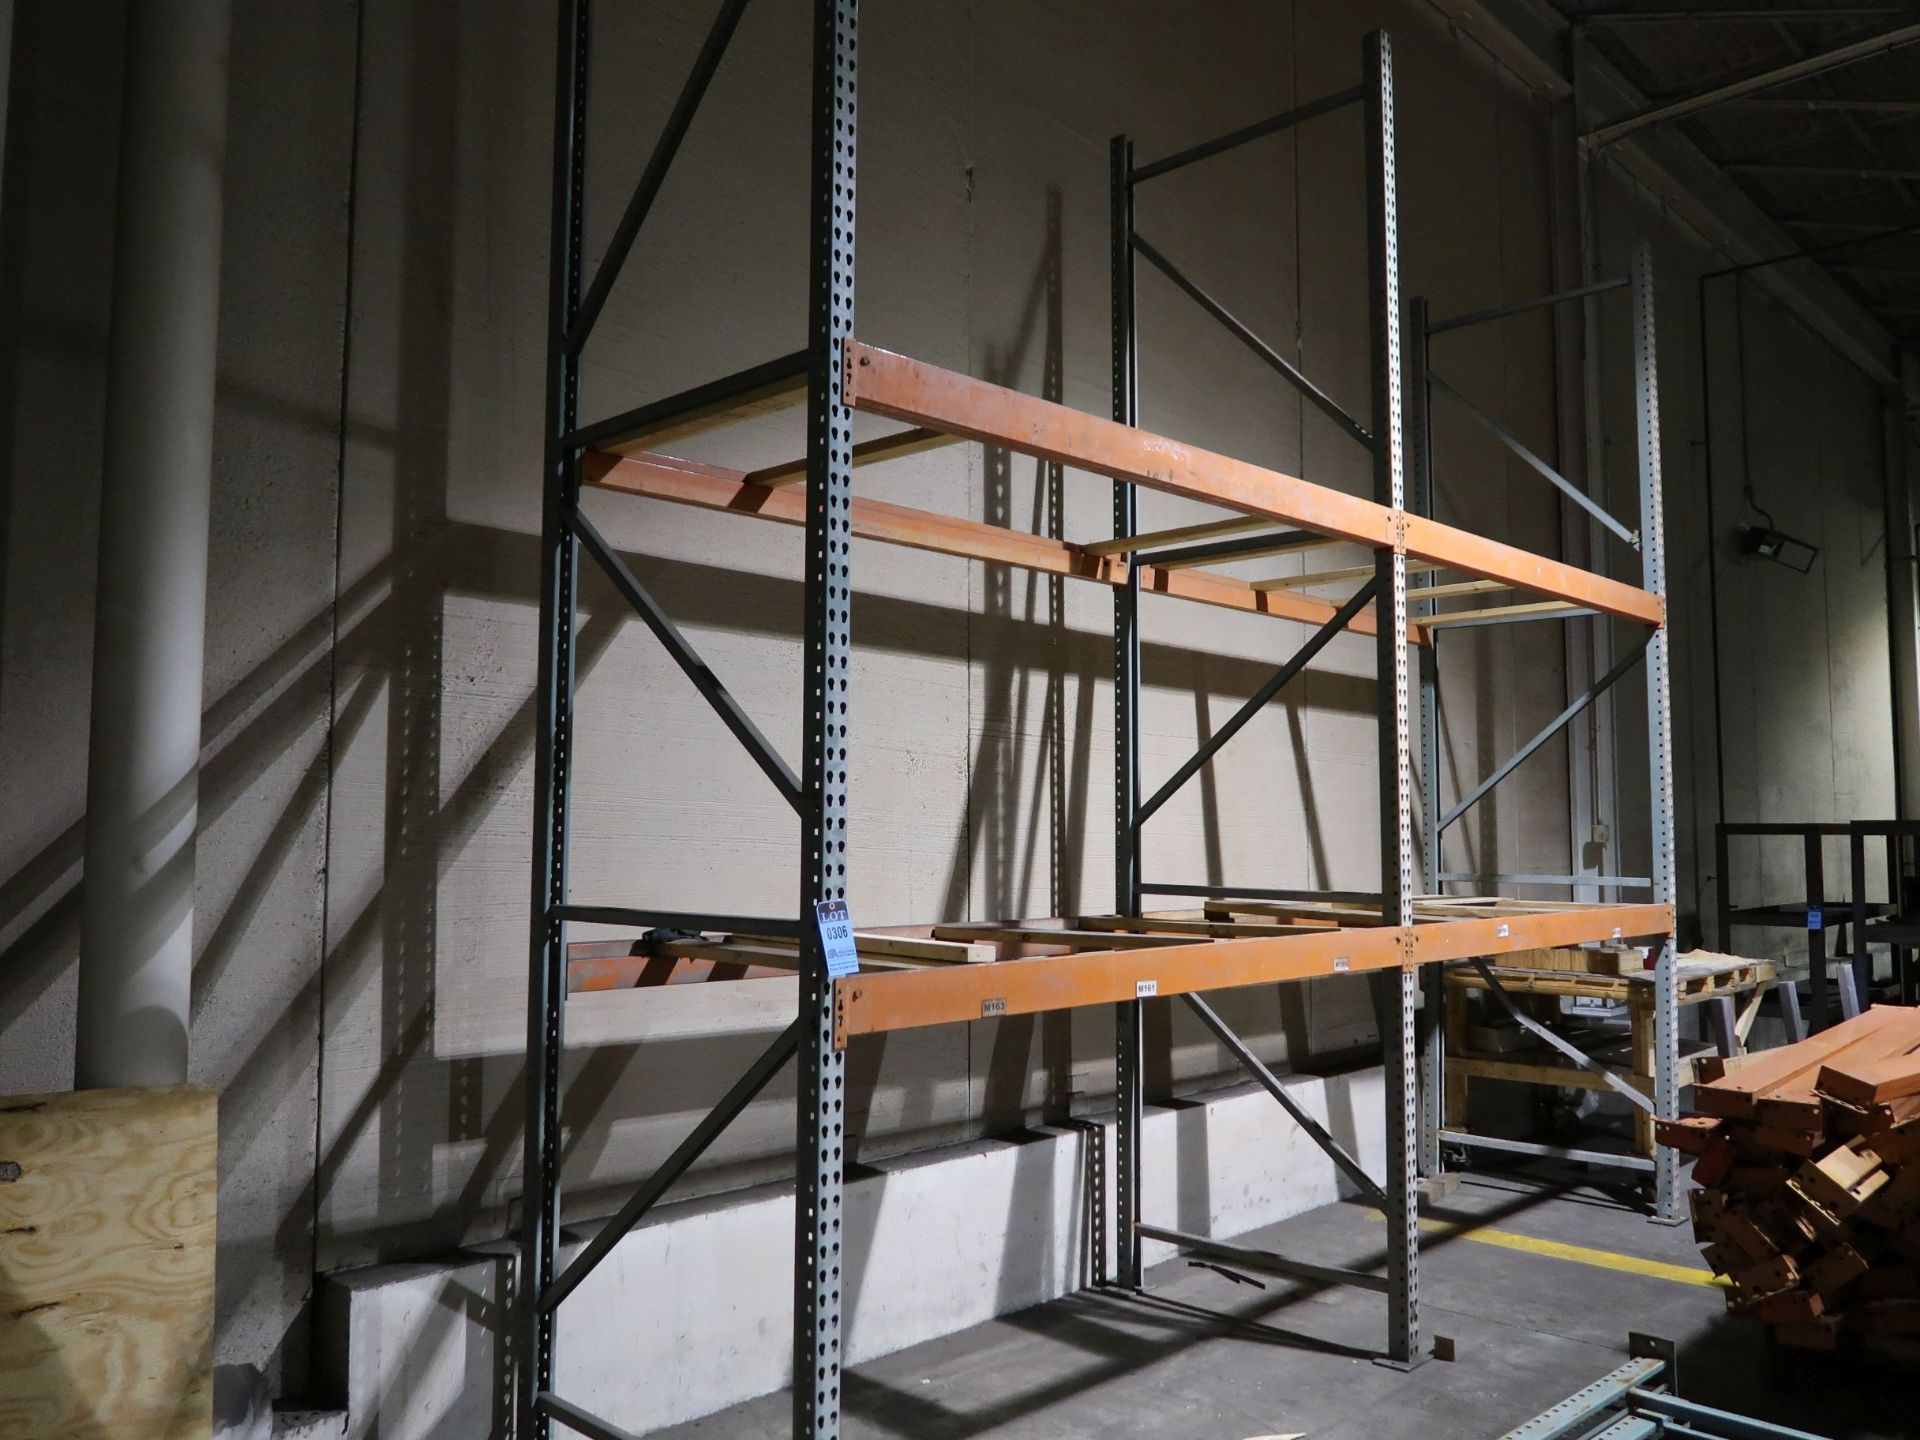 SECTIONS 48" X 96" X 15' HIGH ADJUSTABLE BEAM TEAR DROP STYLE PALLET RACK